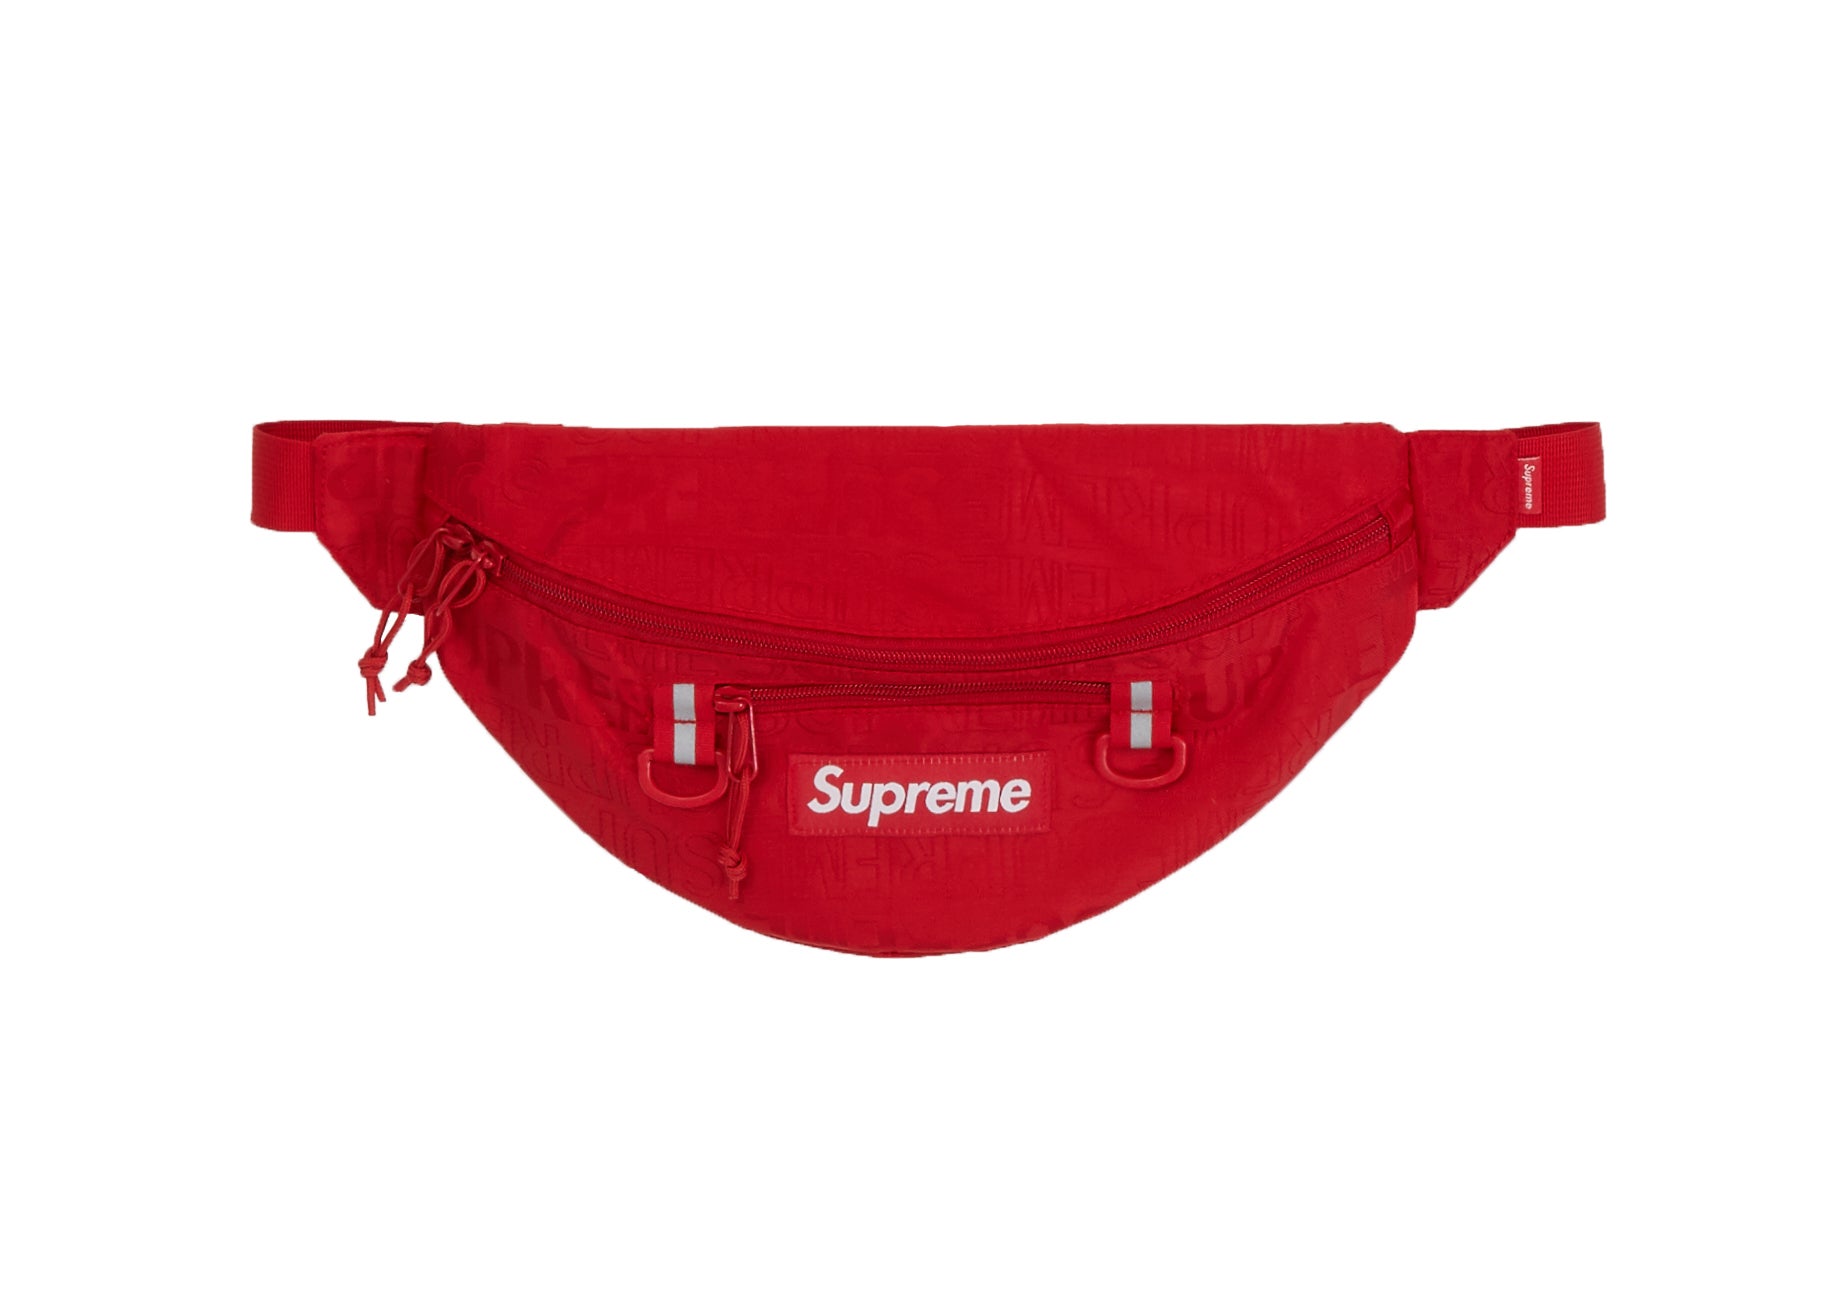 Sale > supreme red waist bag > in stock